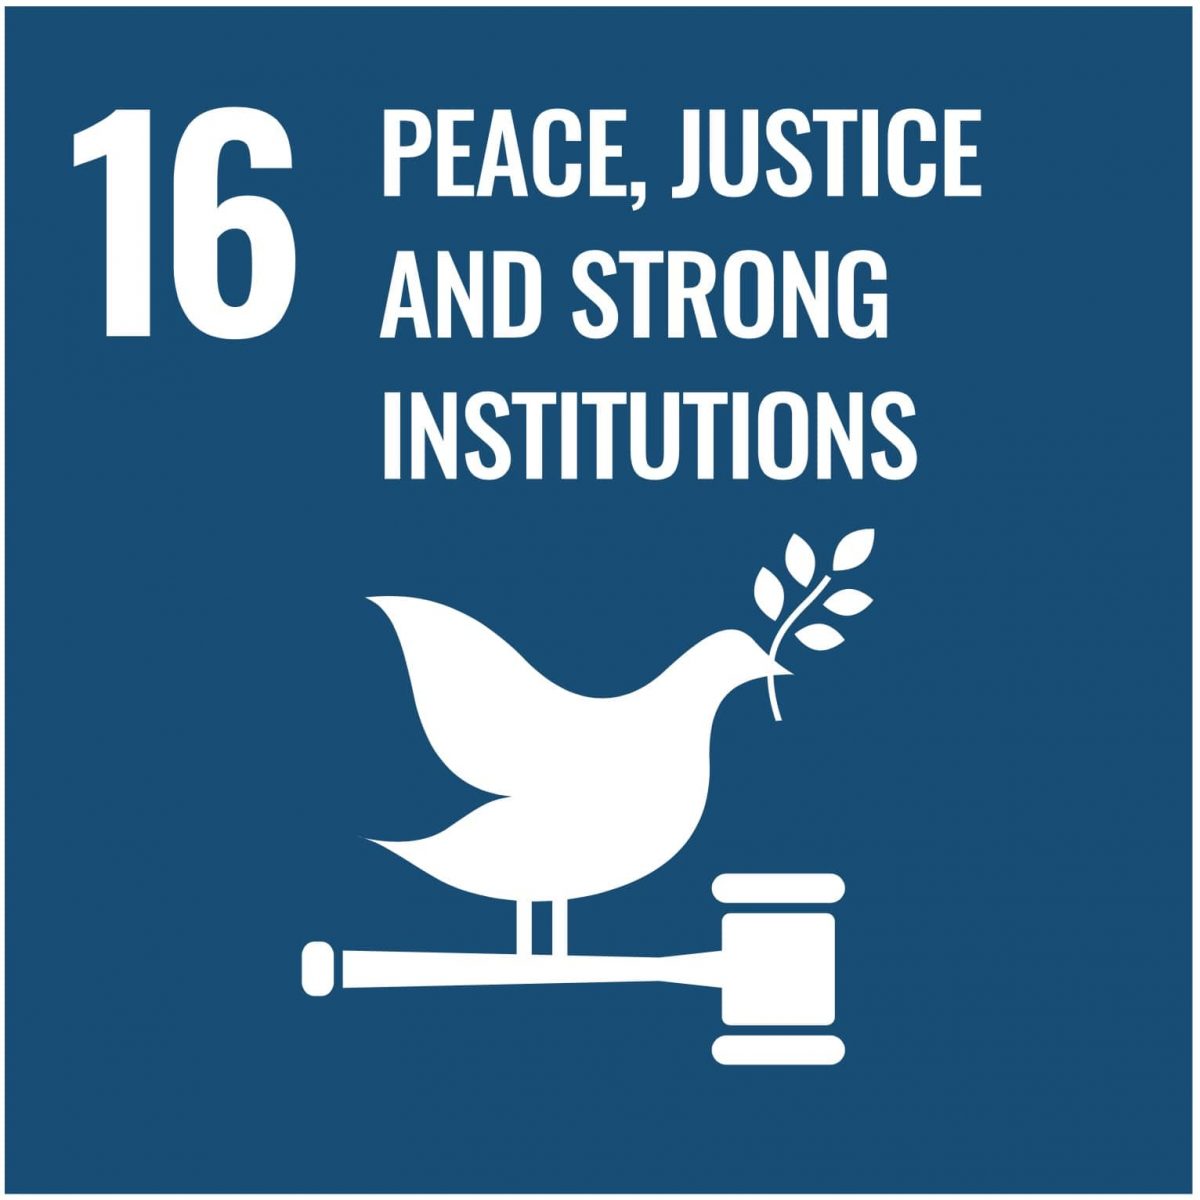 UN-Development-Goal-16-peace-justice-strong-institution-min-sustainable-goals